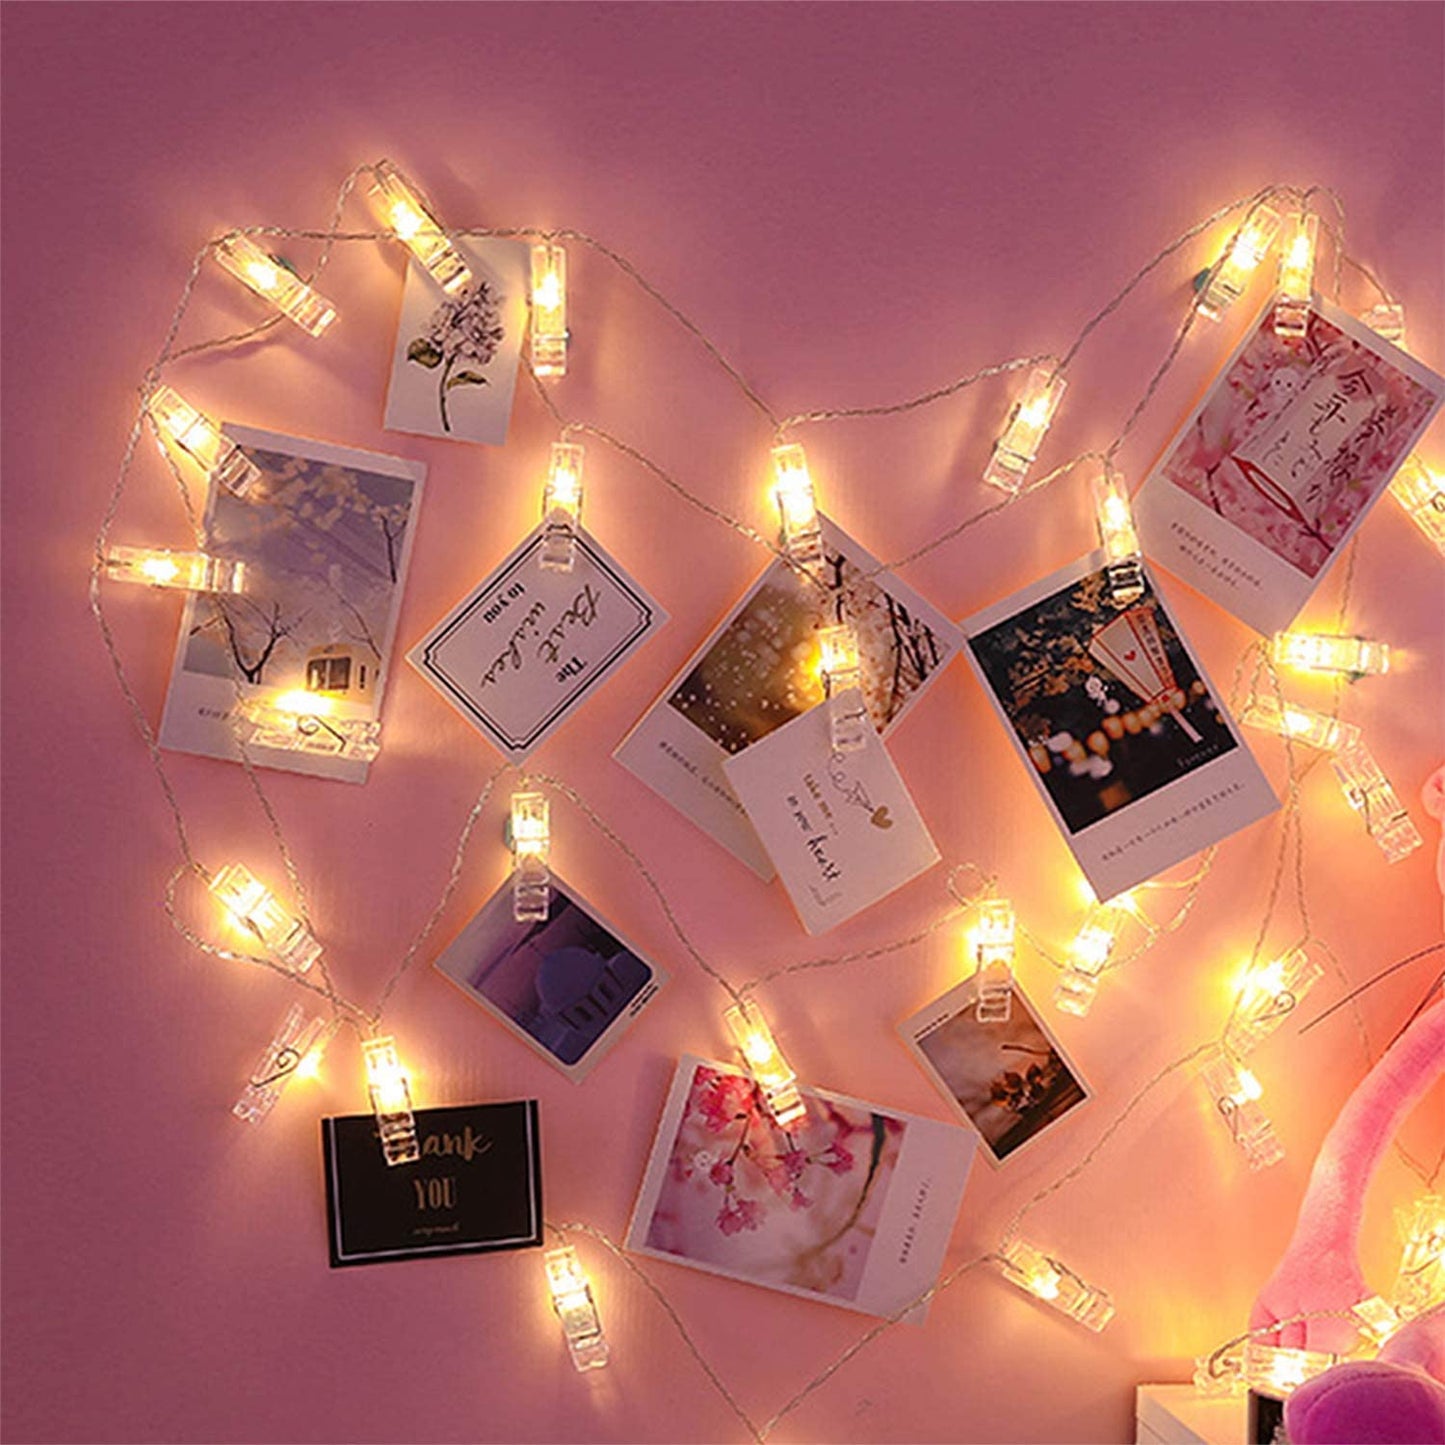 Lixada Fairy Lights Photo Clip String Lights - 7.22FT 20 LED Warm White Battery Powered Photo String Lights for Hanging Pictures Cards in Living Room Bedroom Party Wall Wedding